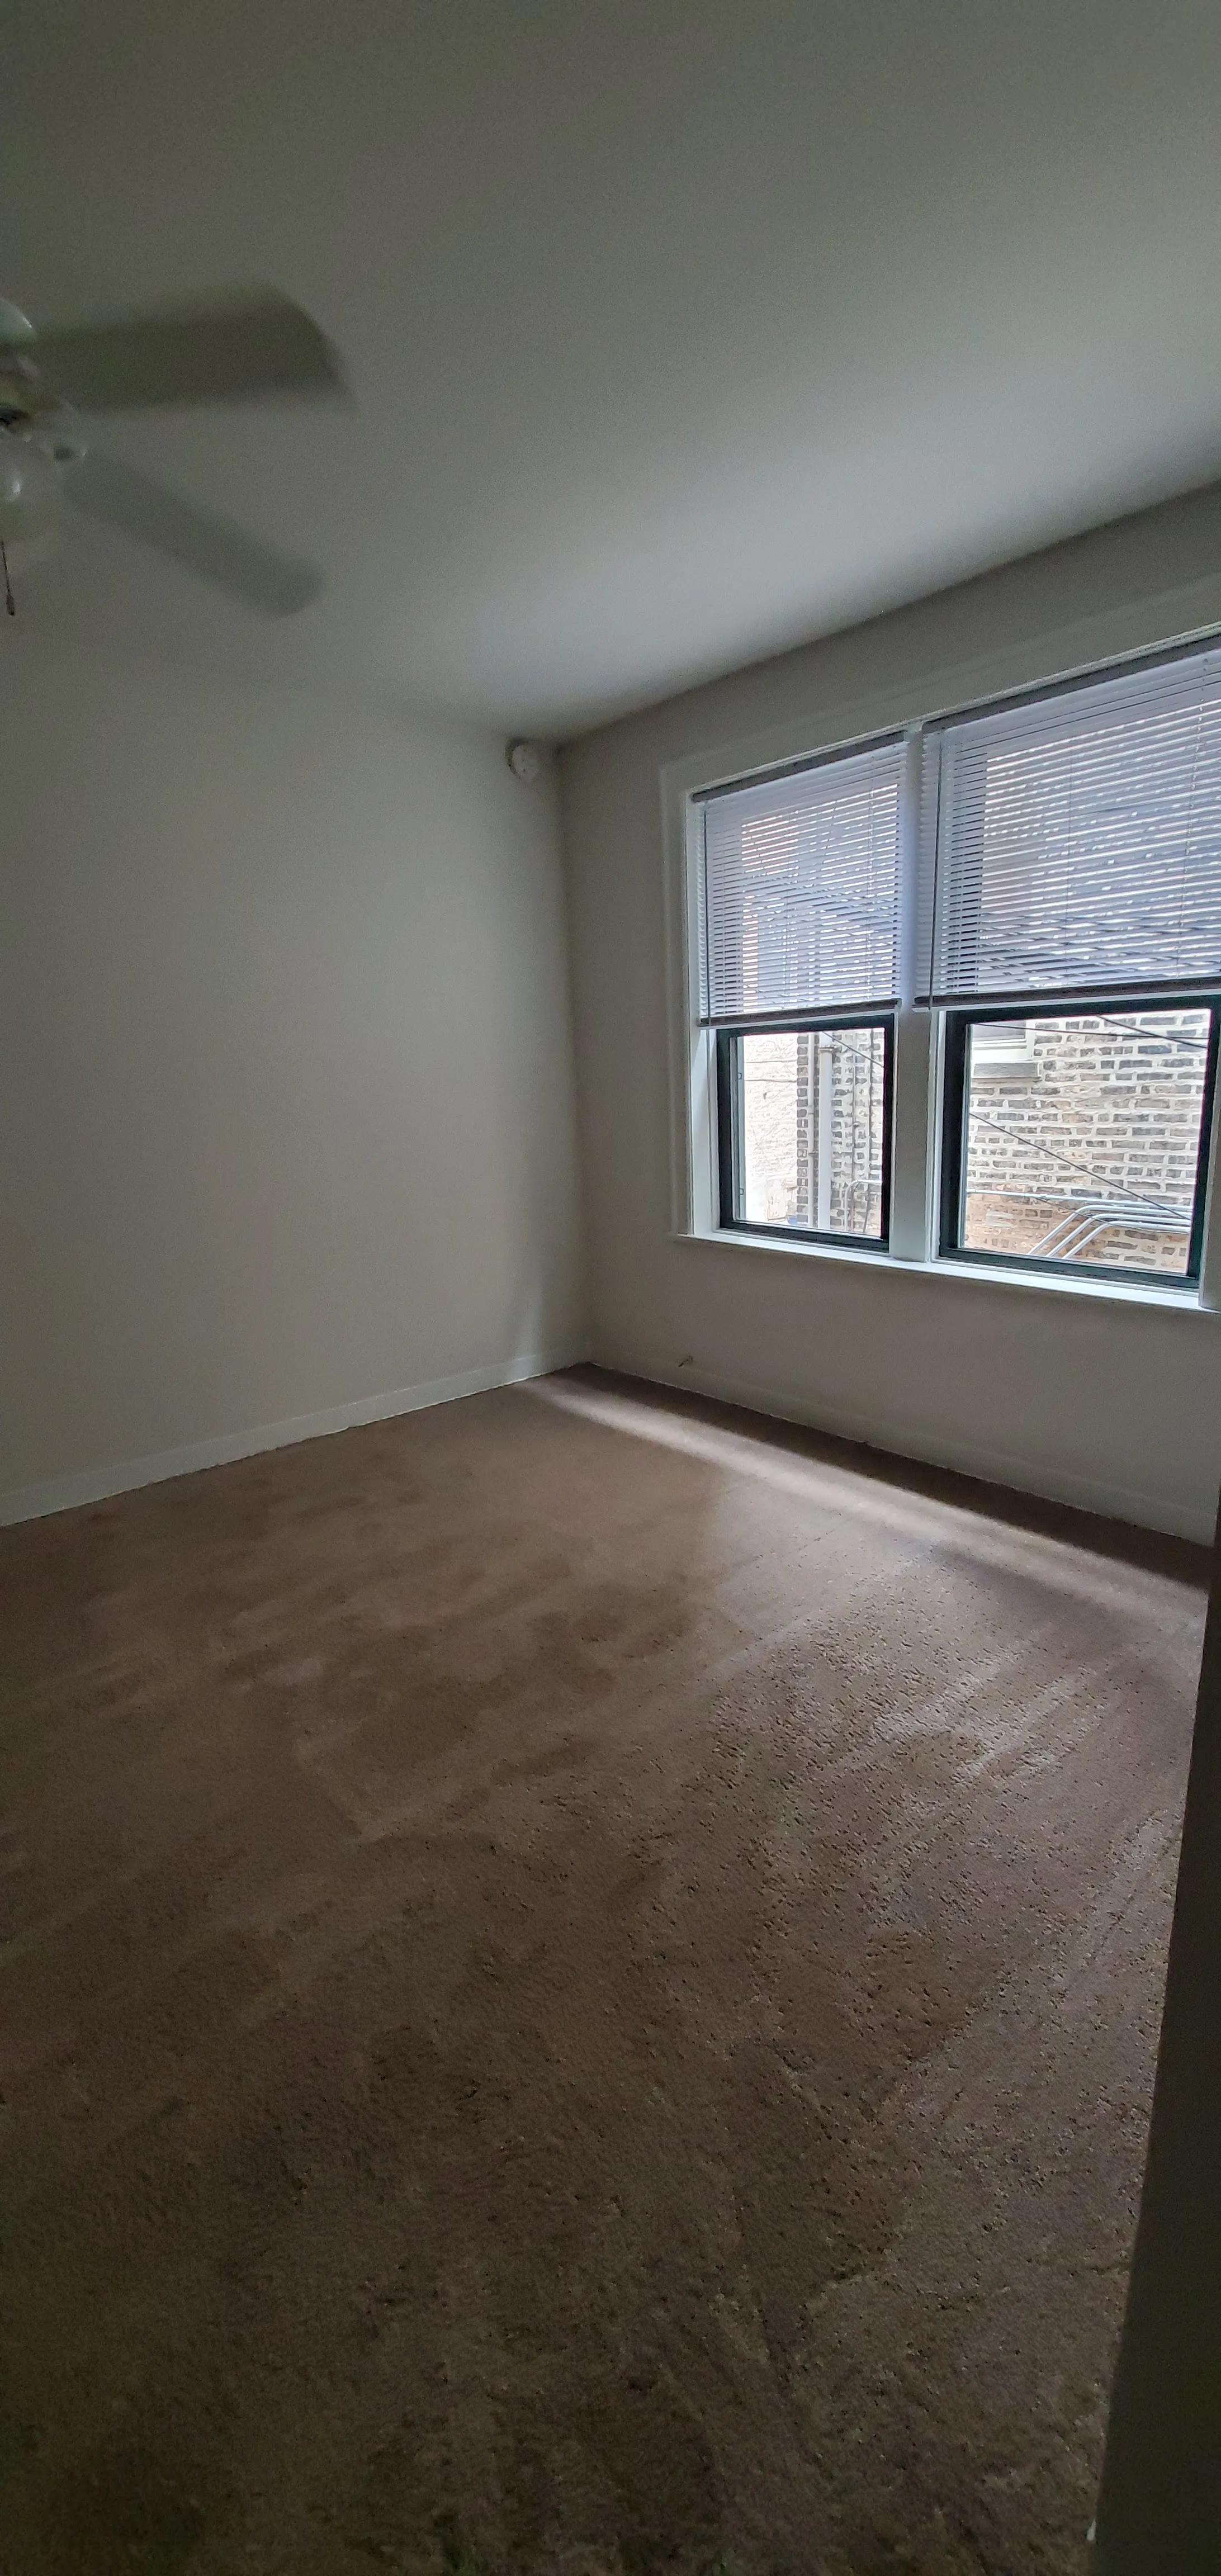 4606 N Hermitage Ave 60640 60640-unit#114-Chicago-IL